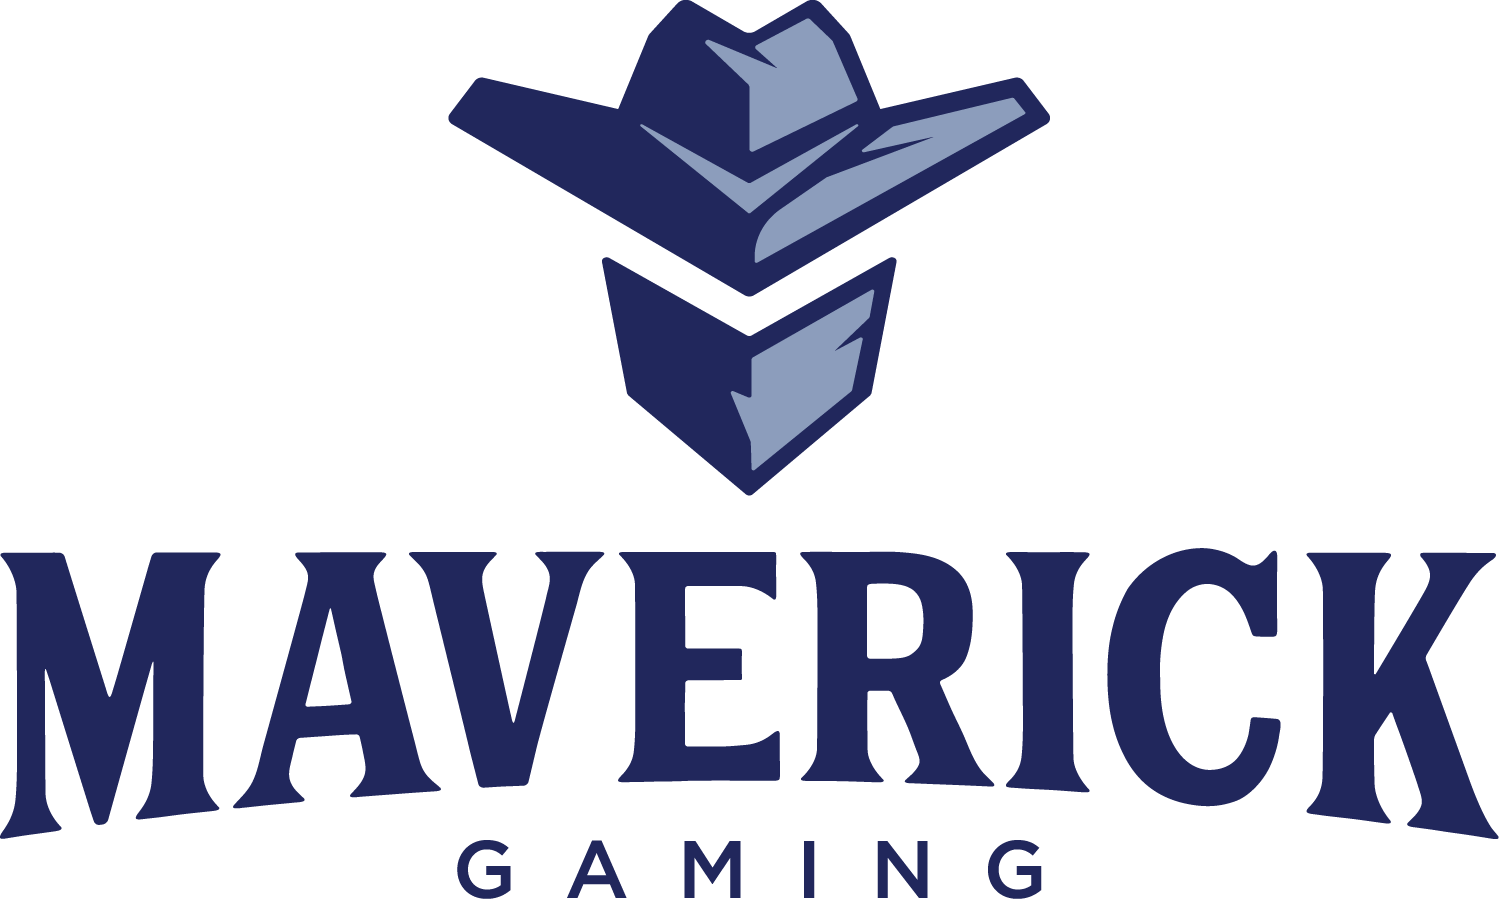 Maverick Gaming introduces Cashless Slots for real money slot players